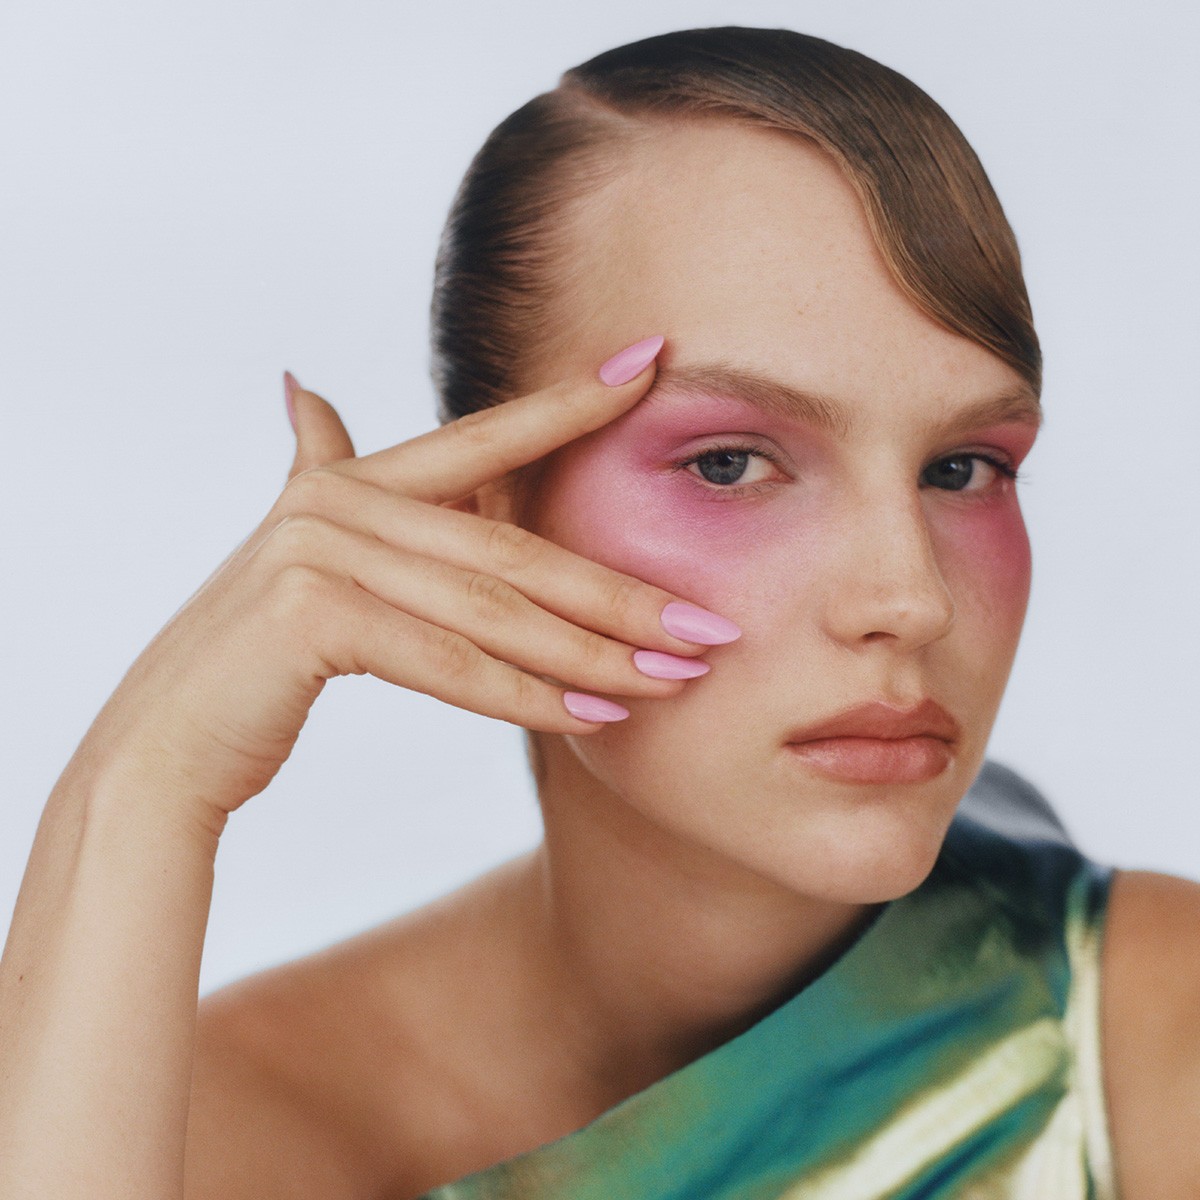 Top 5 makeup trends for spring and summer 2023.